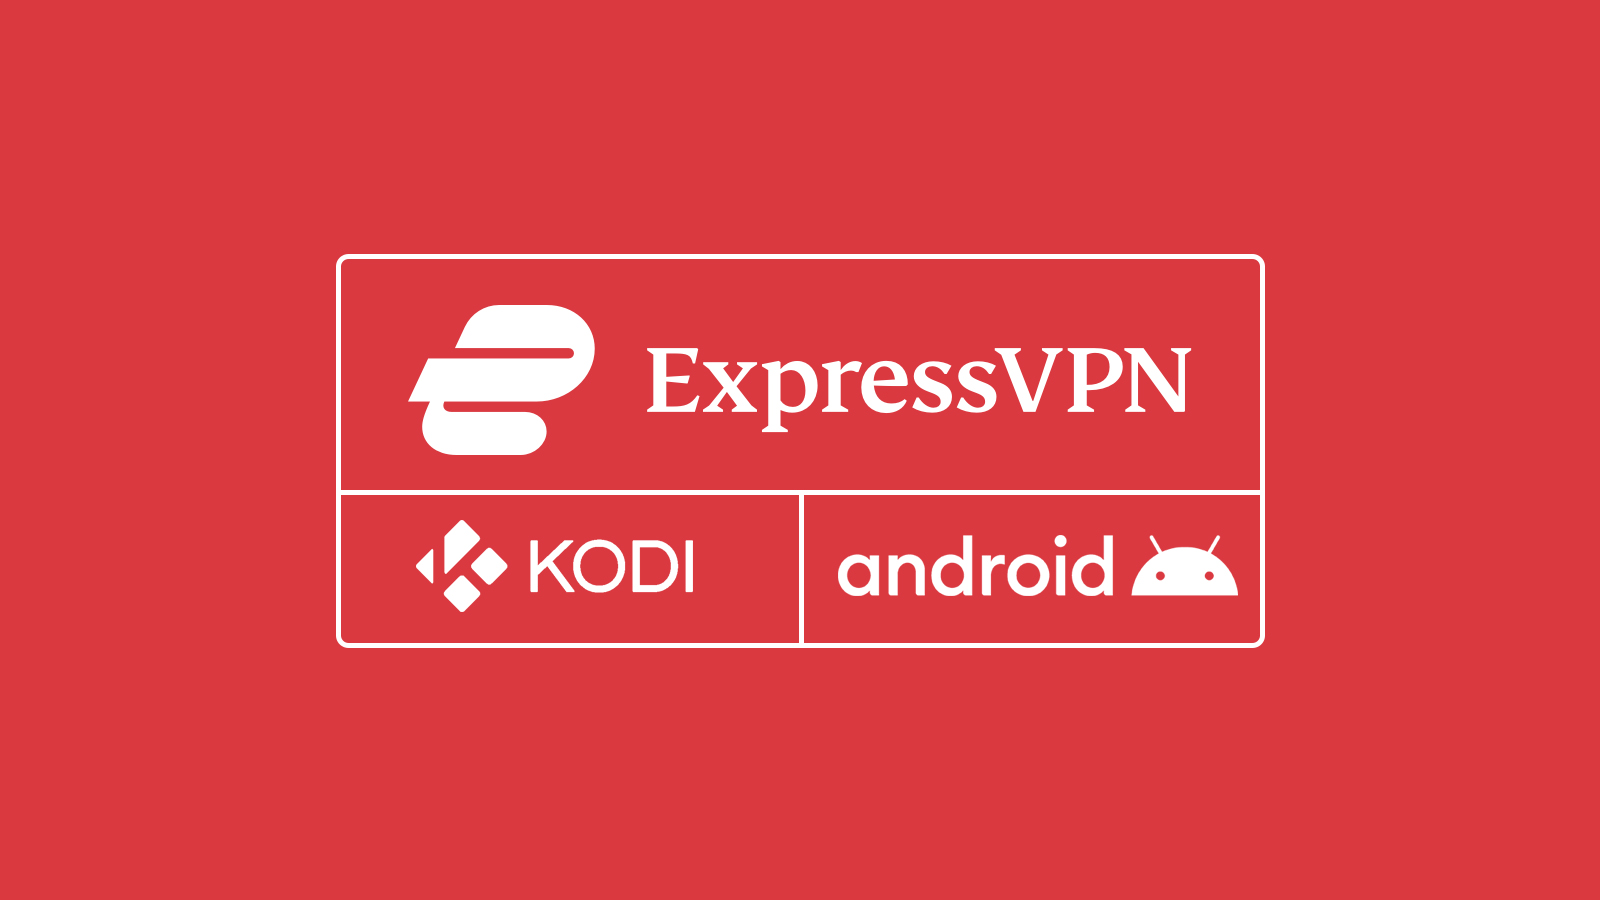 How to Use Kodi With ExpressVPN on Android